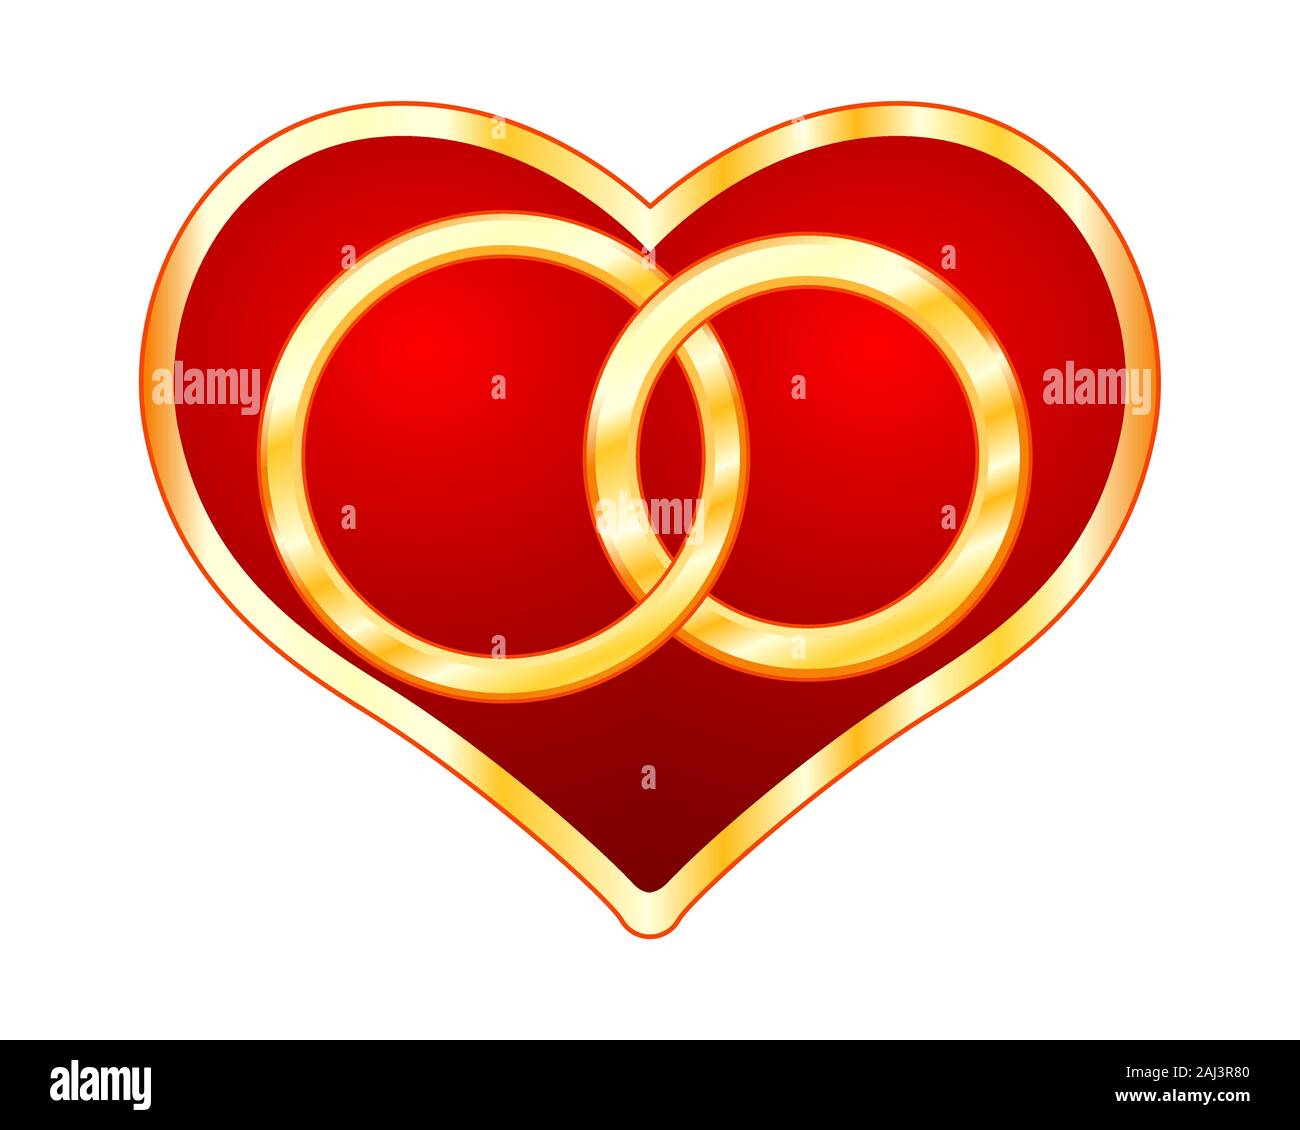 Illustration of the valentine's day abstract heart and wedding rings Stock Vector